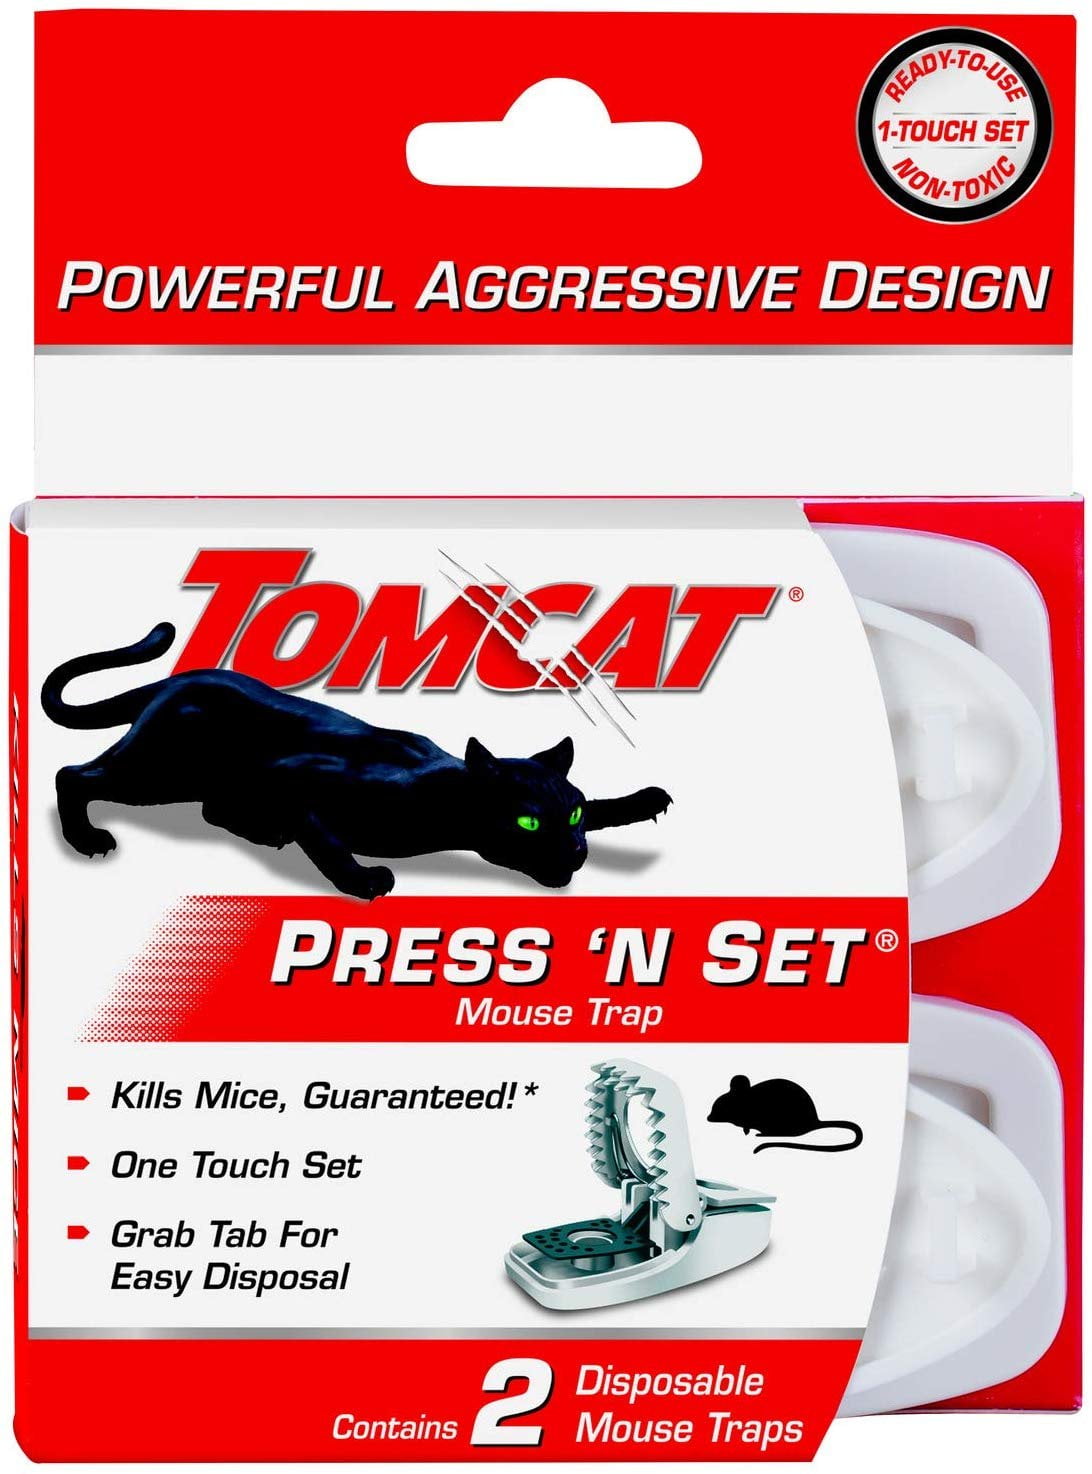 This Tomcat snap trap is a free buffet : r/MiceRatControl